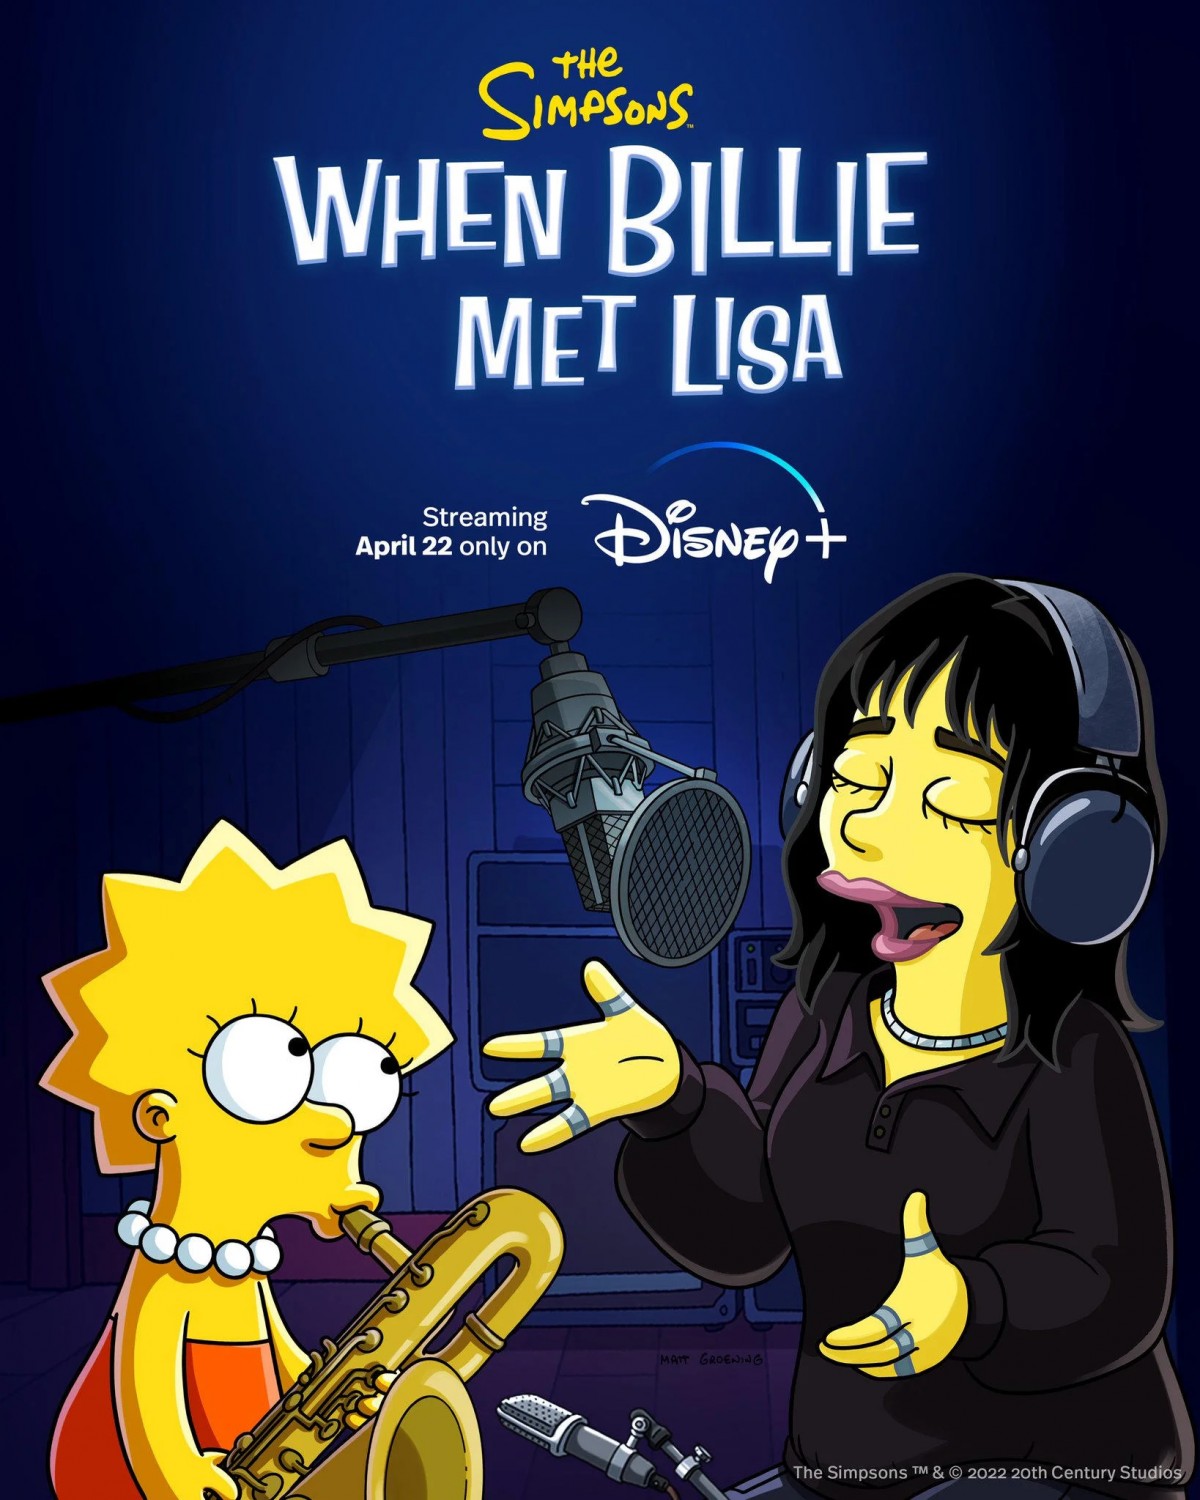 Extra Large Movie Poster Image for When Billie Met Lisa